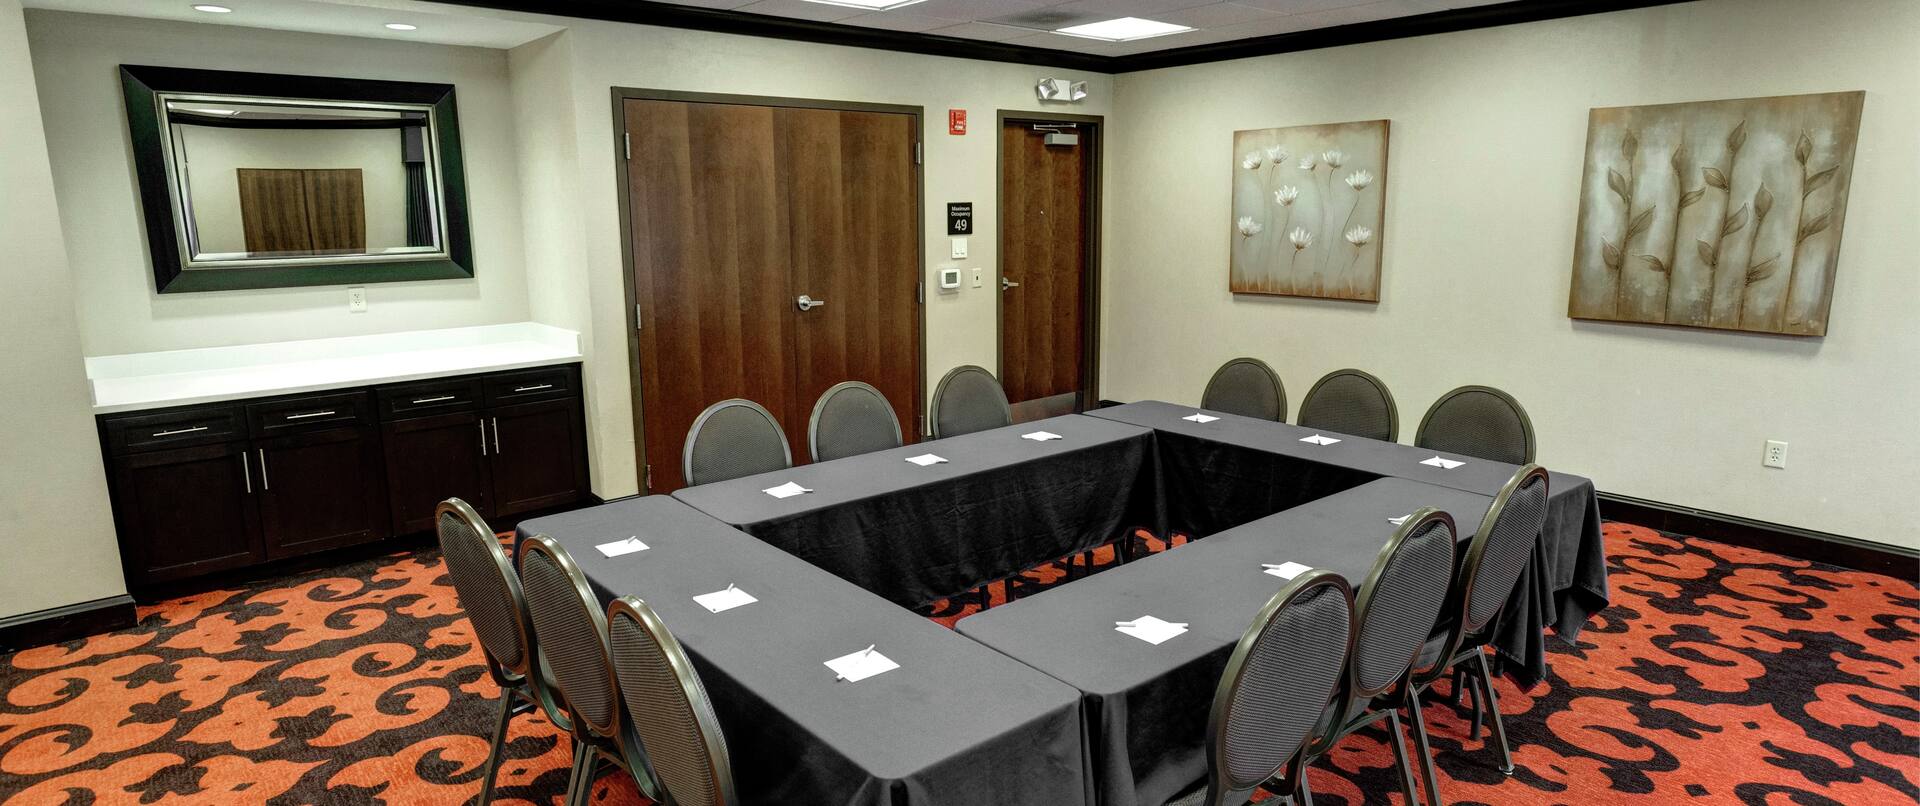 Hollow Square Meeting Setup in Shark River Room